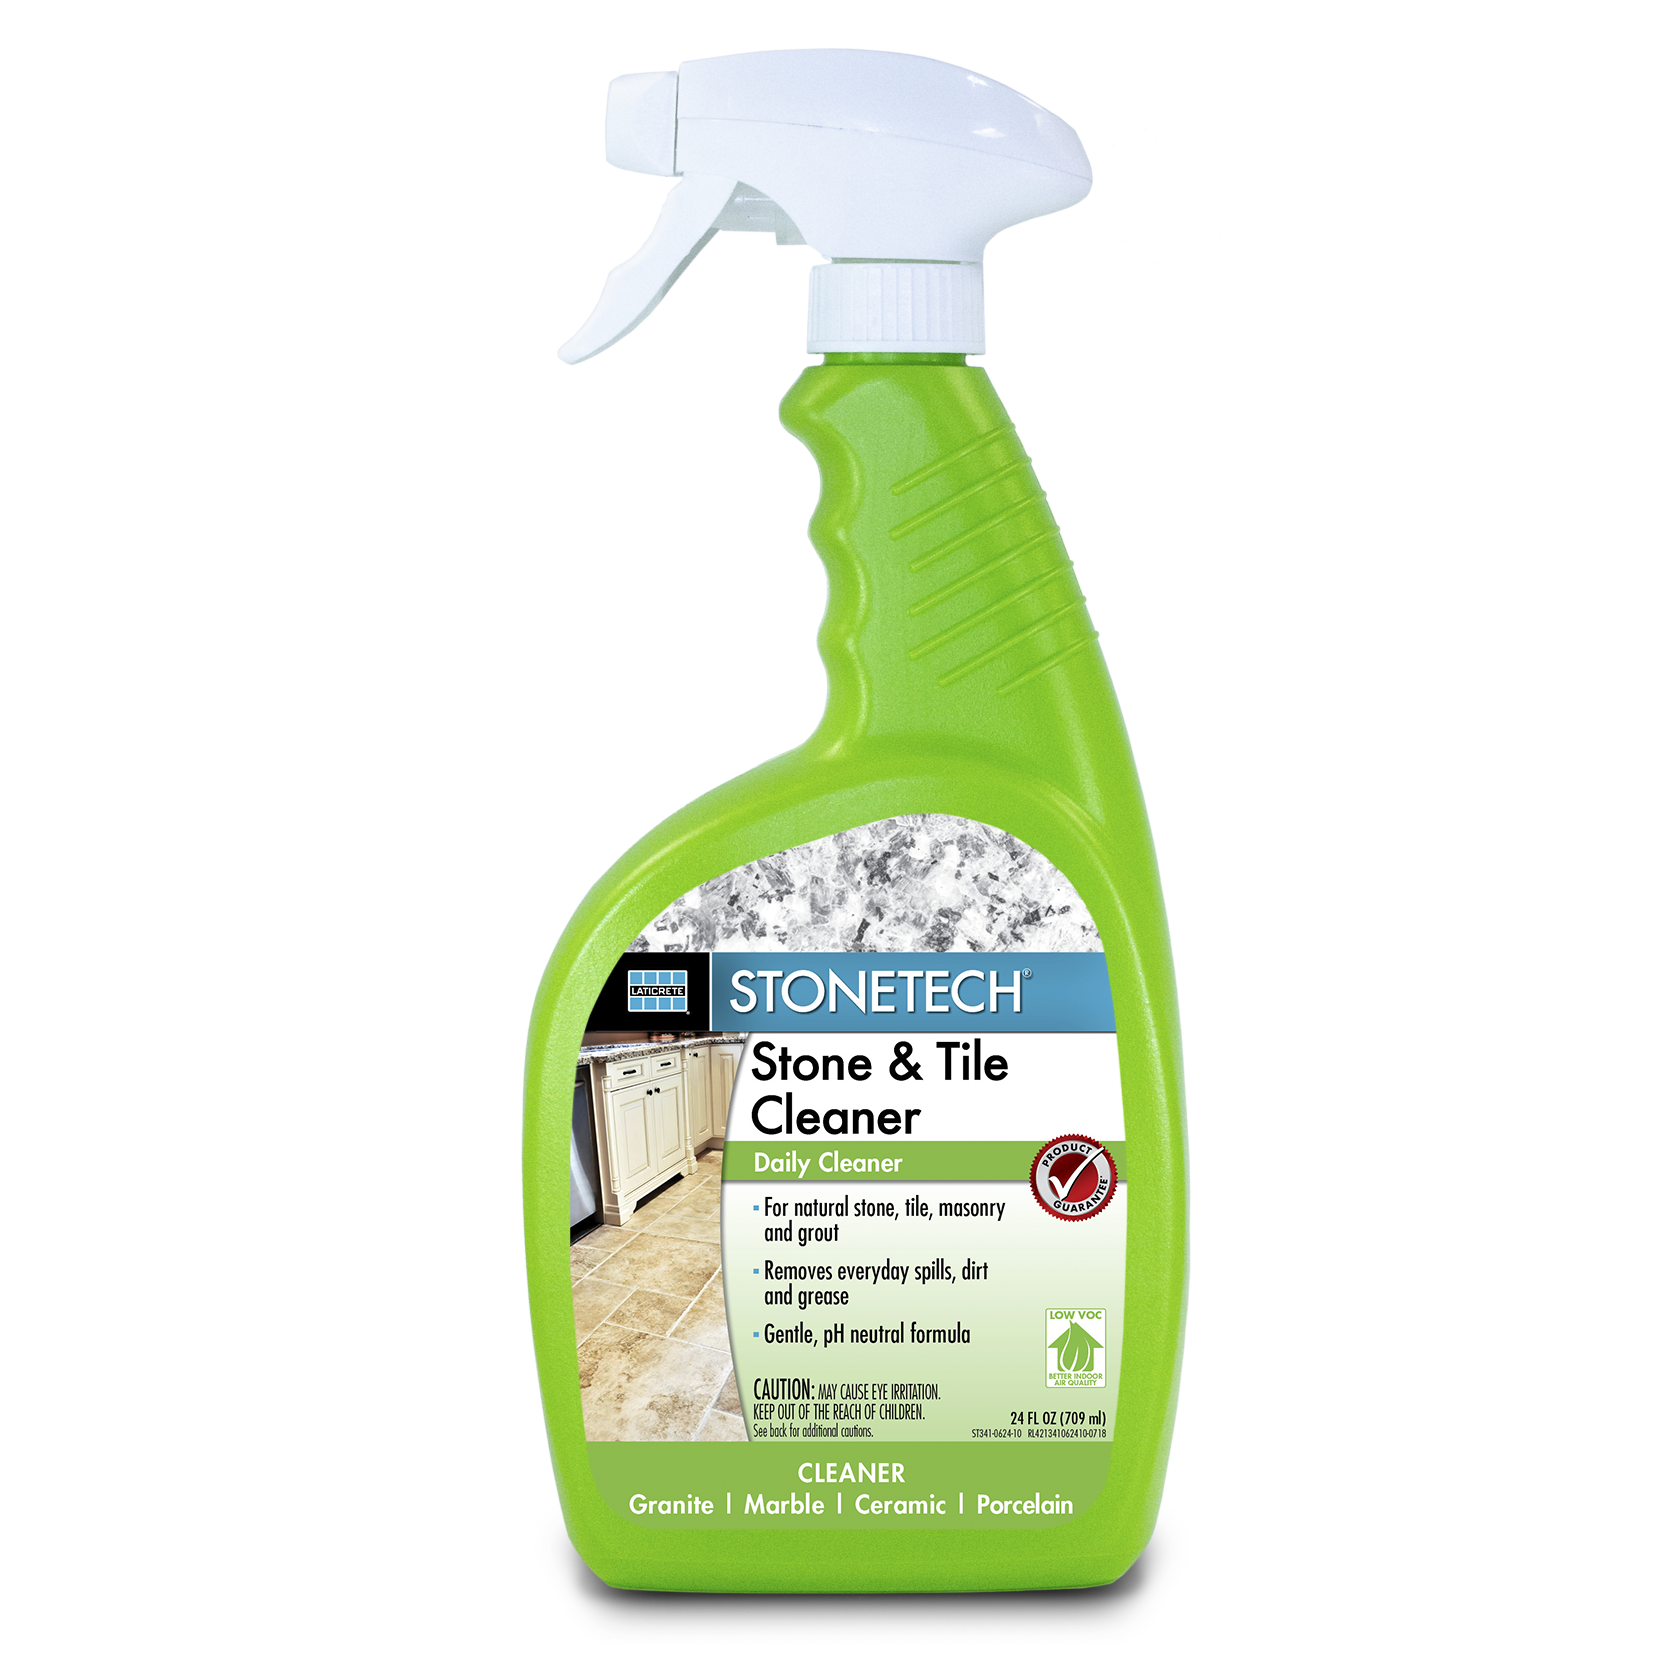 StoneTech Professional Stone and Tile Cleaner